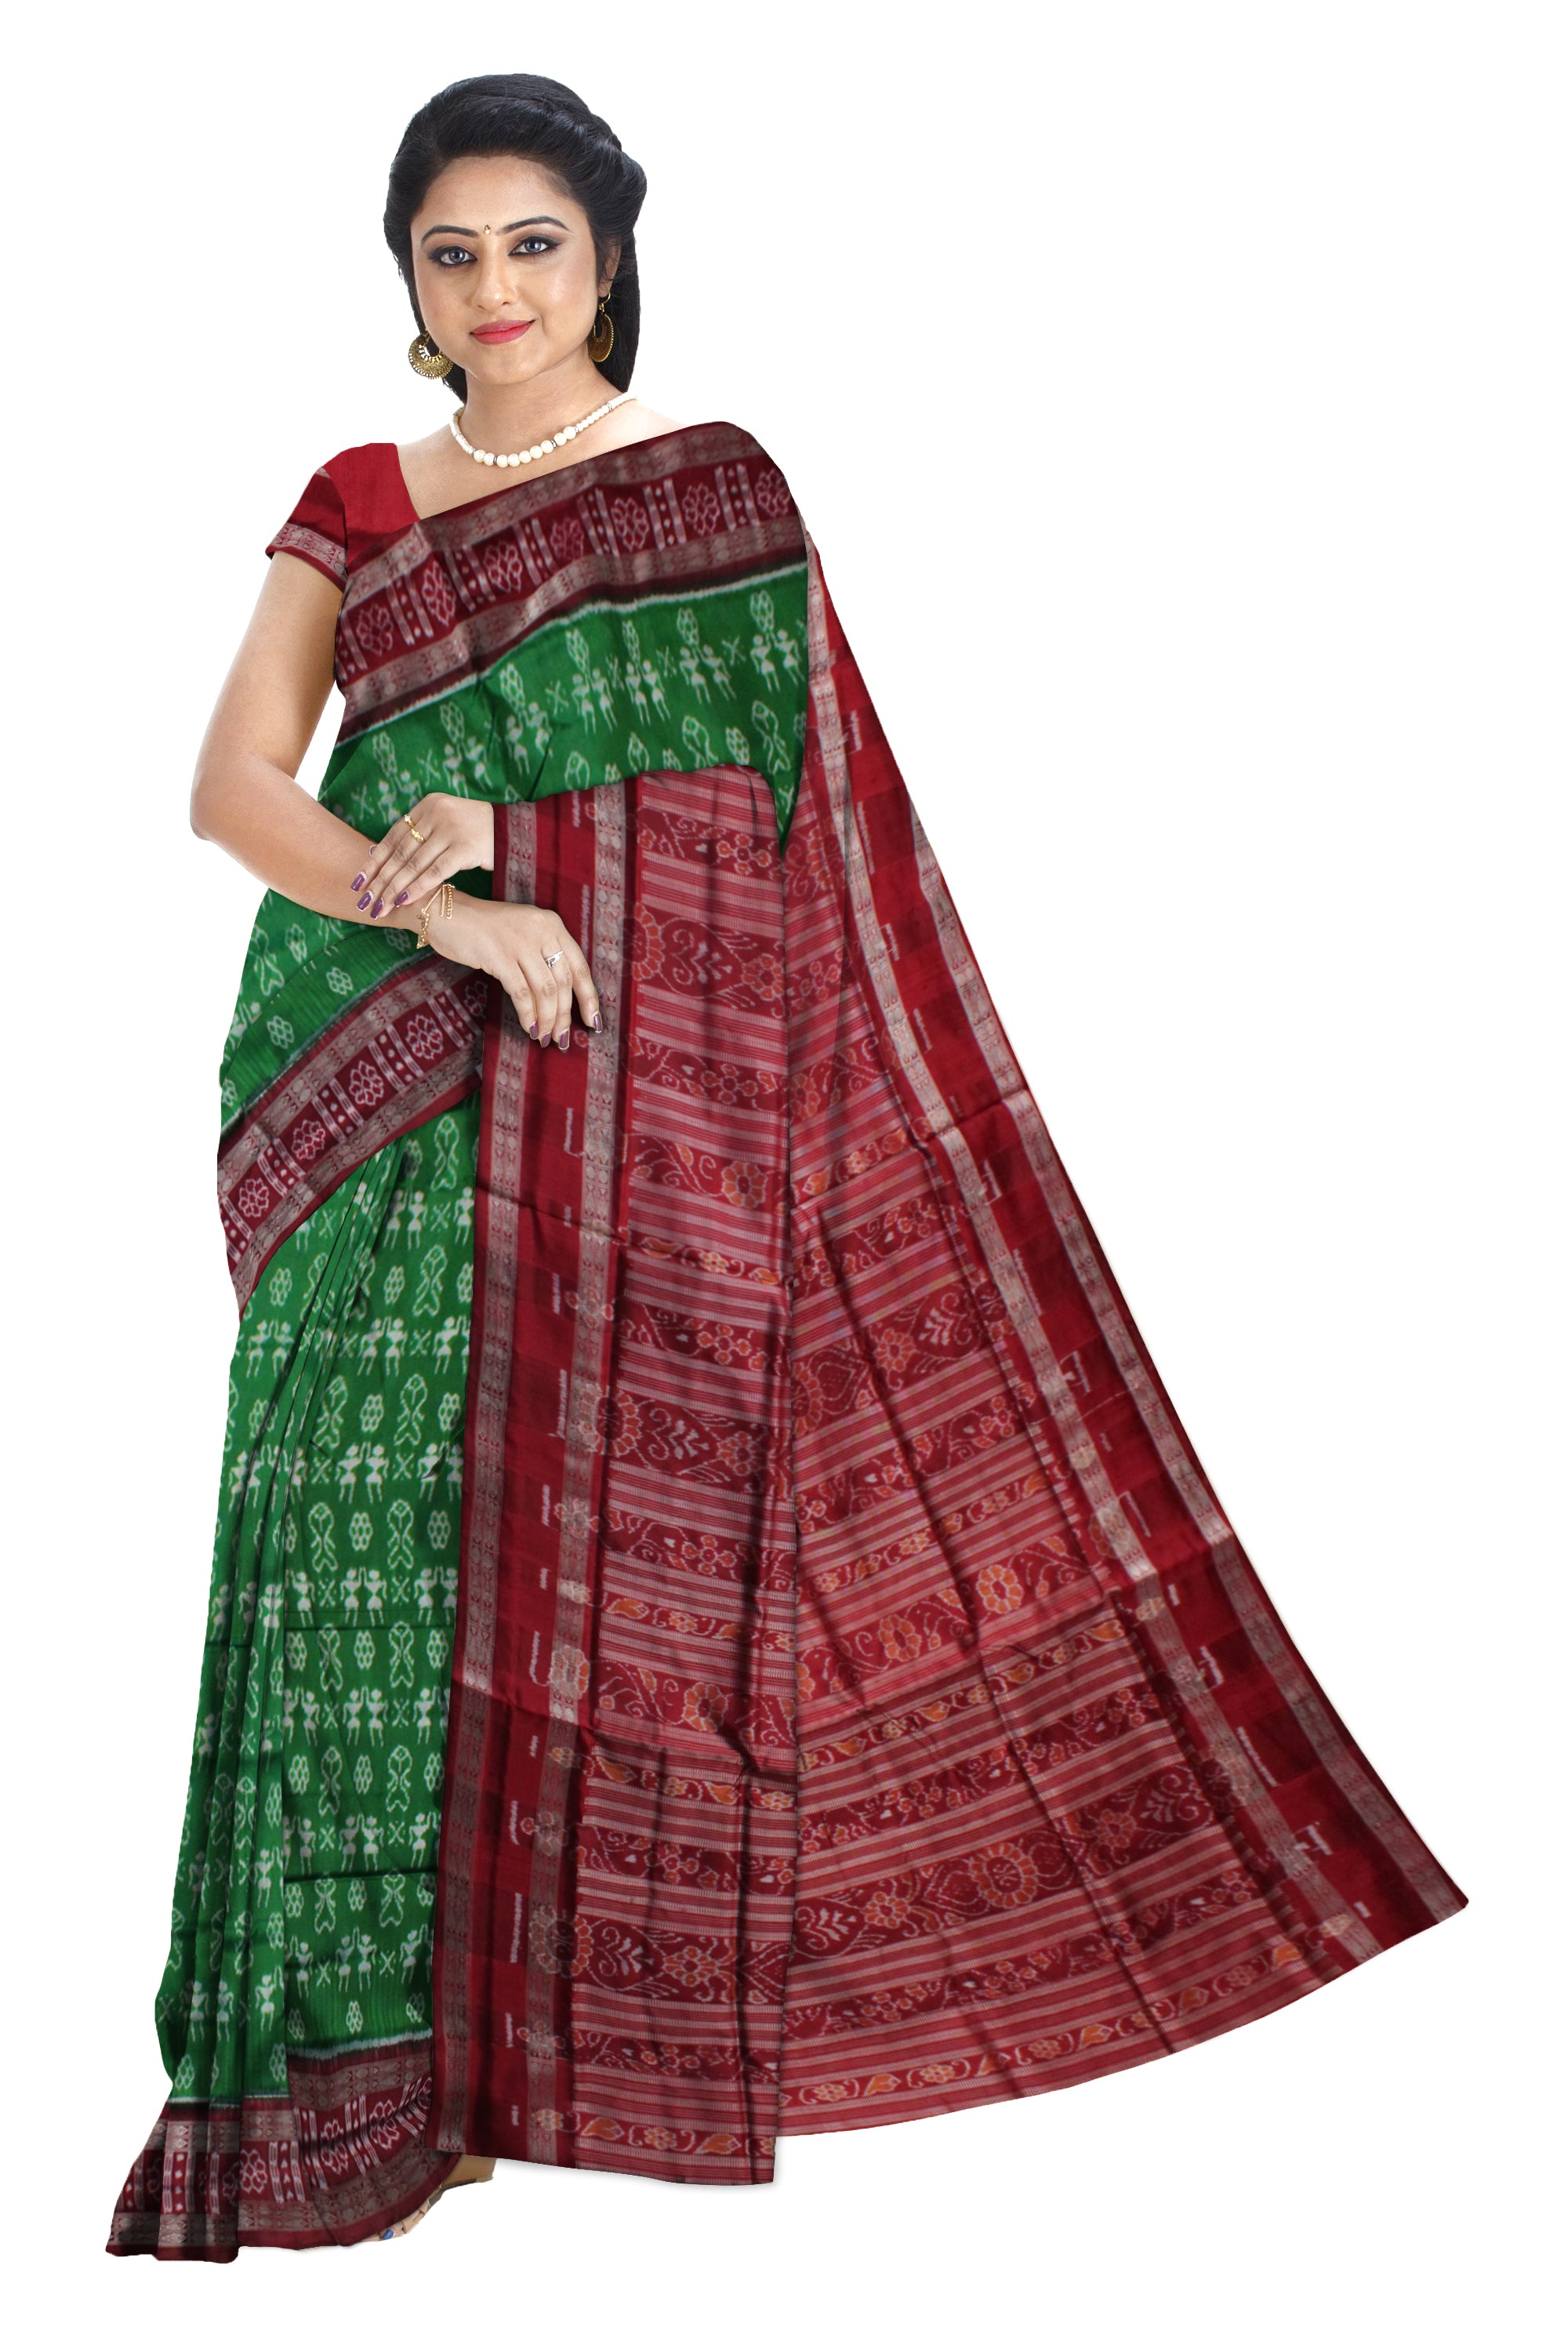 SMALL TERRACOTTA WITH FISH PATTERN PURE SILK SAREE IS GREEN AND MAROON COLOR,WITH BLOUSE PIECE. - Koshali Arts & Crafts Enterprise